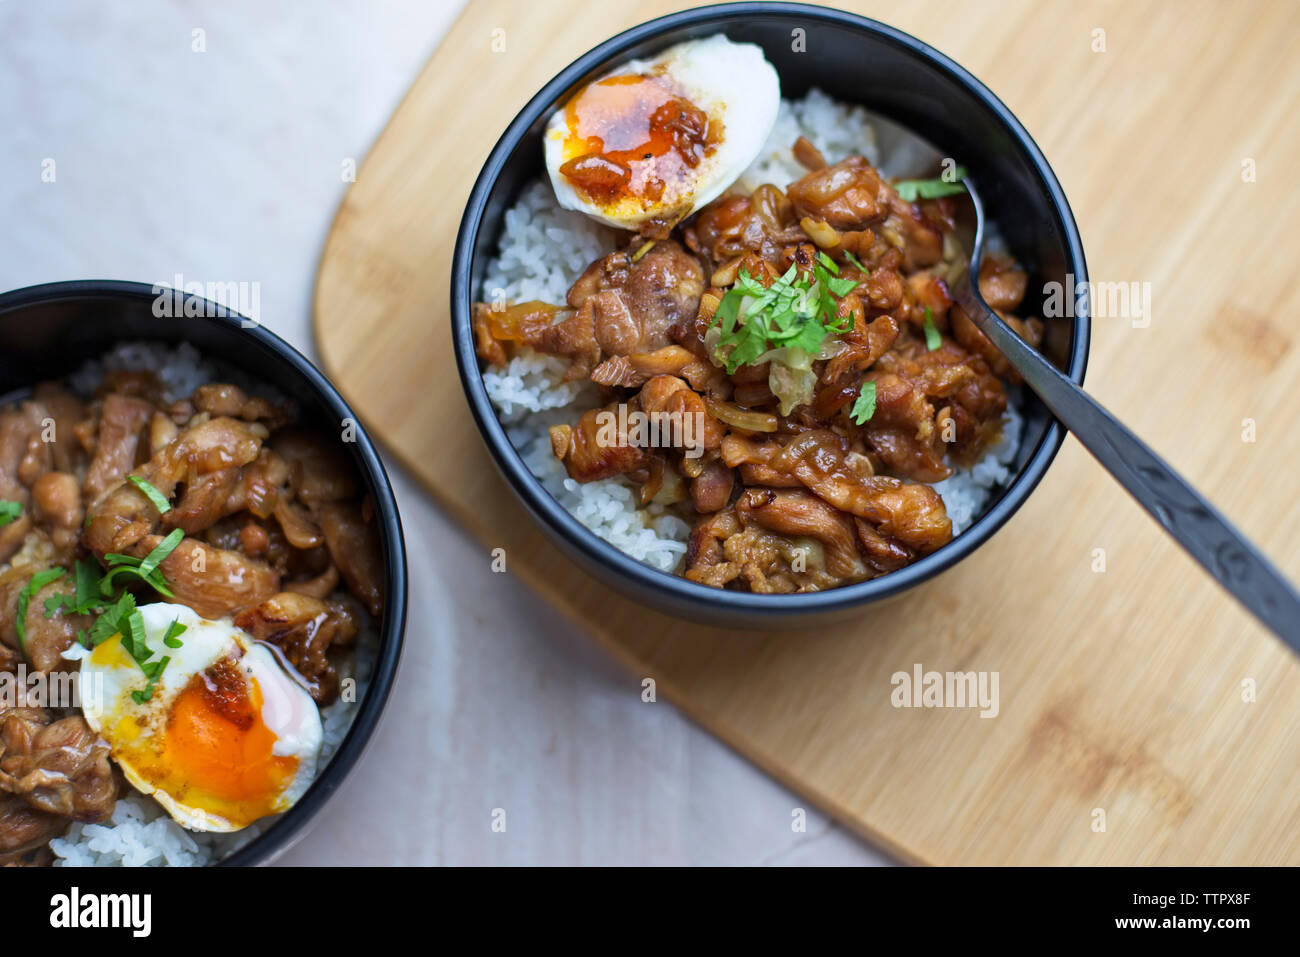 High angle view of meal served in bowls on table Stock Photo